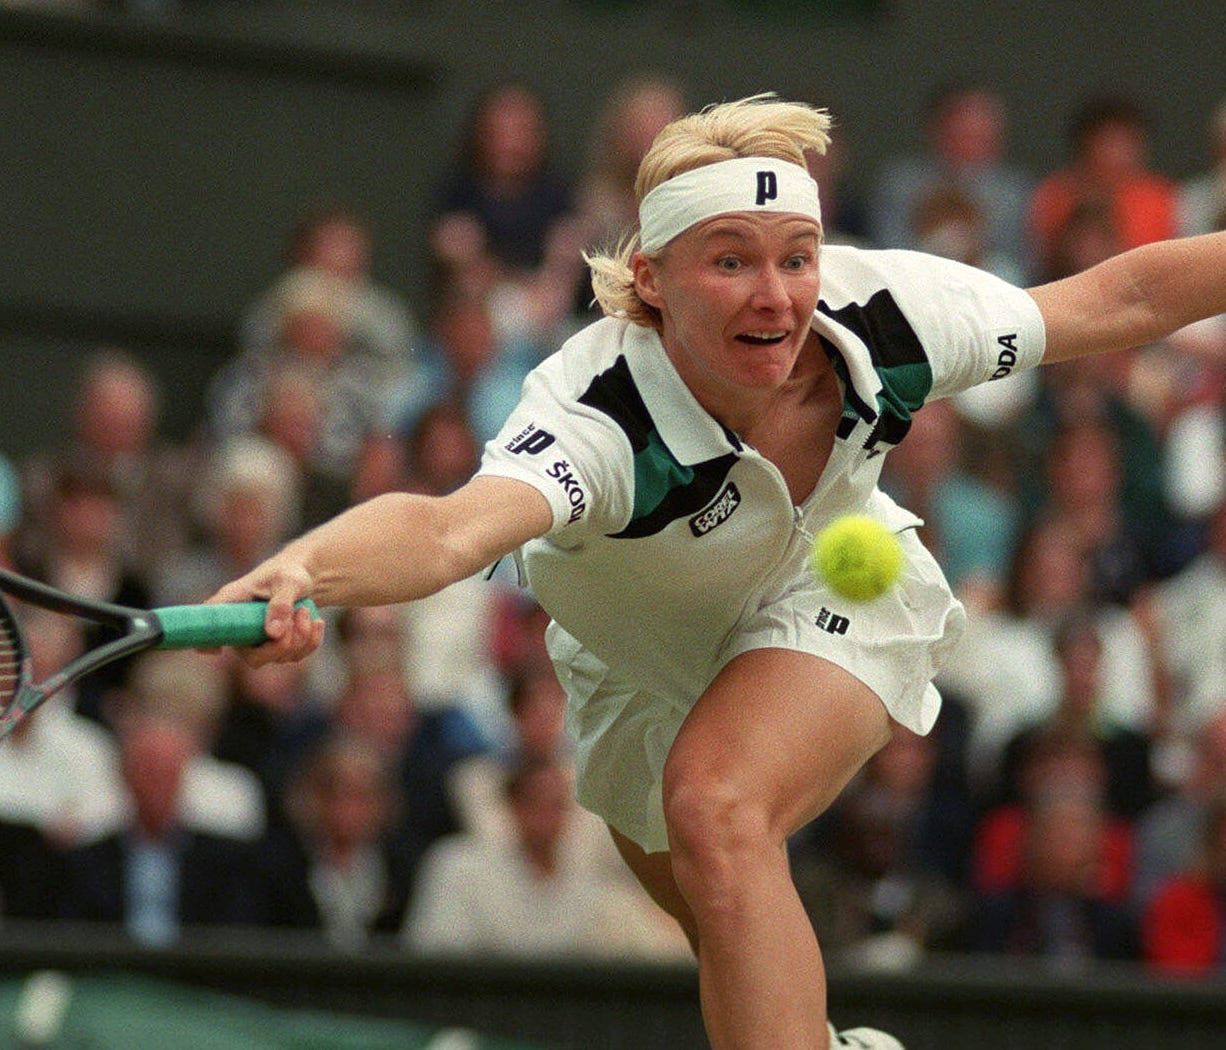 FILE - In this July 4, 1998 file photo, Jana Novotna of the Czech Republic, stretches to make a return to Nathalie Tauziat of France, during the women's singles final match on Wimbledon's Centre Court.  Women's Tennis Association says 1998 Wimbledon 